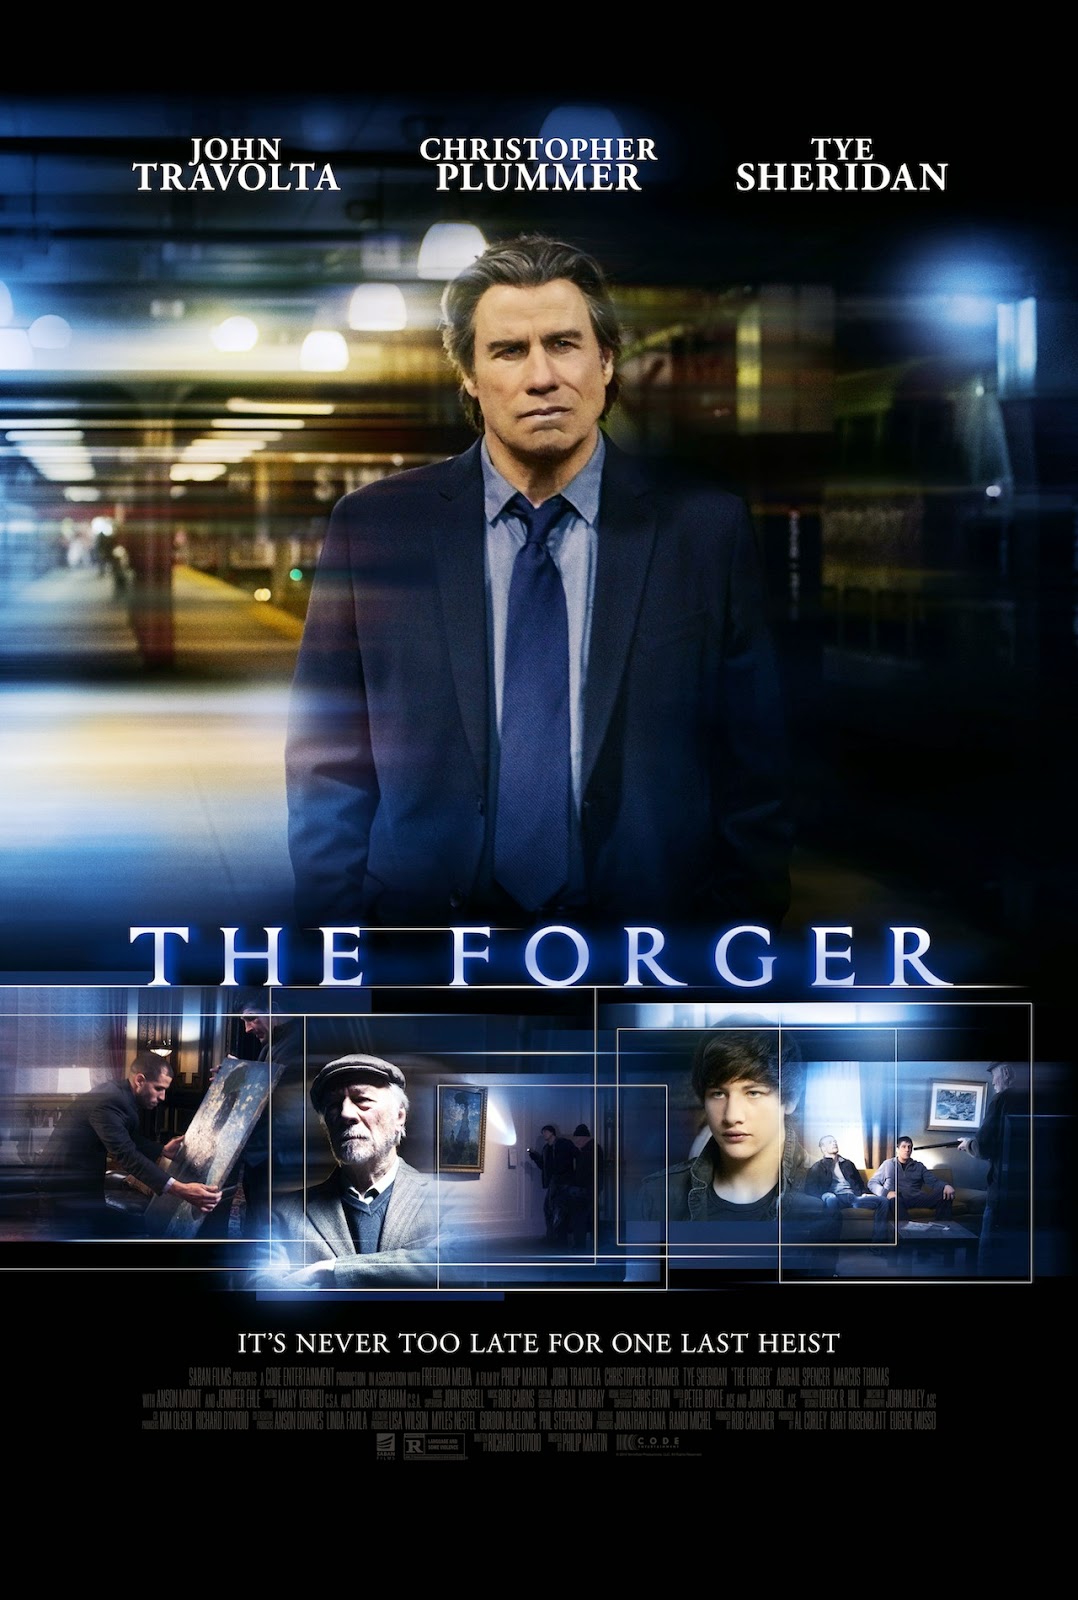 The Forger 2014